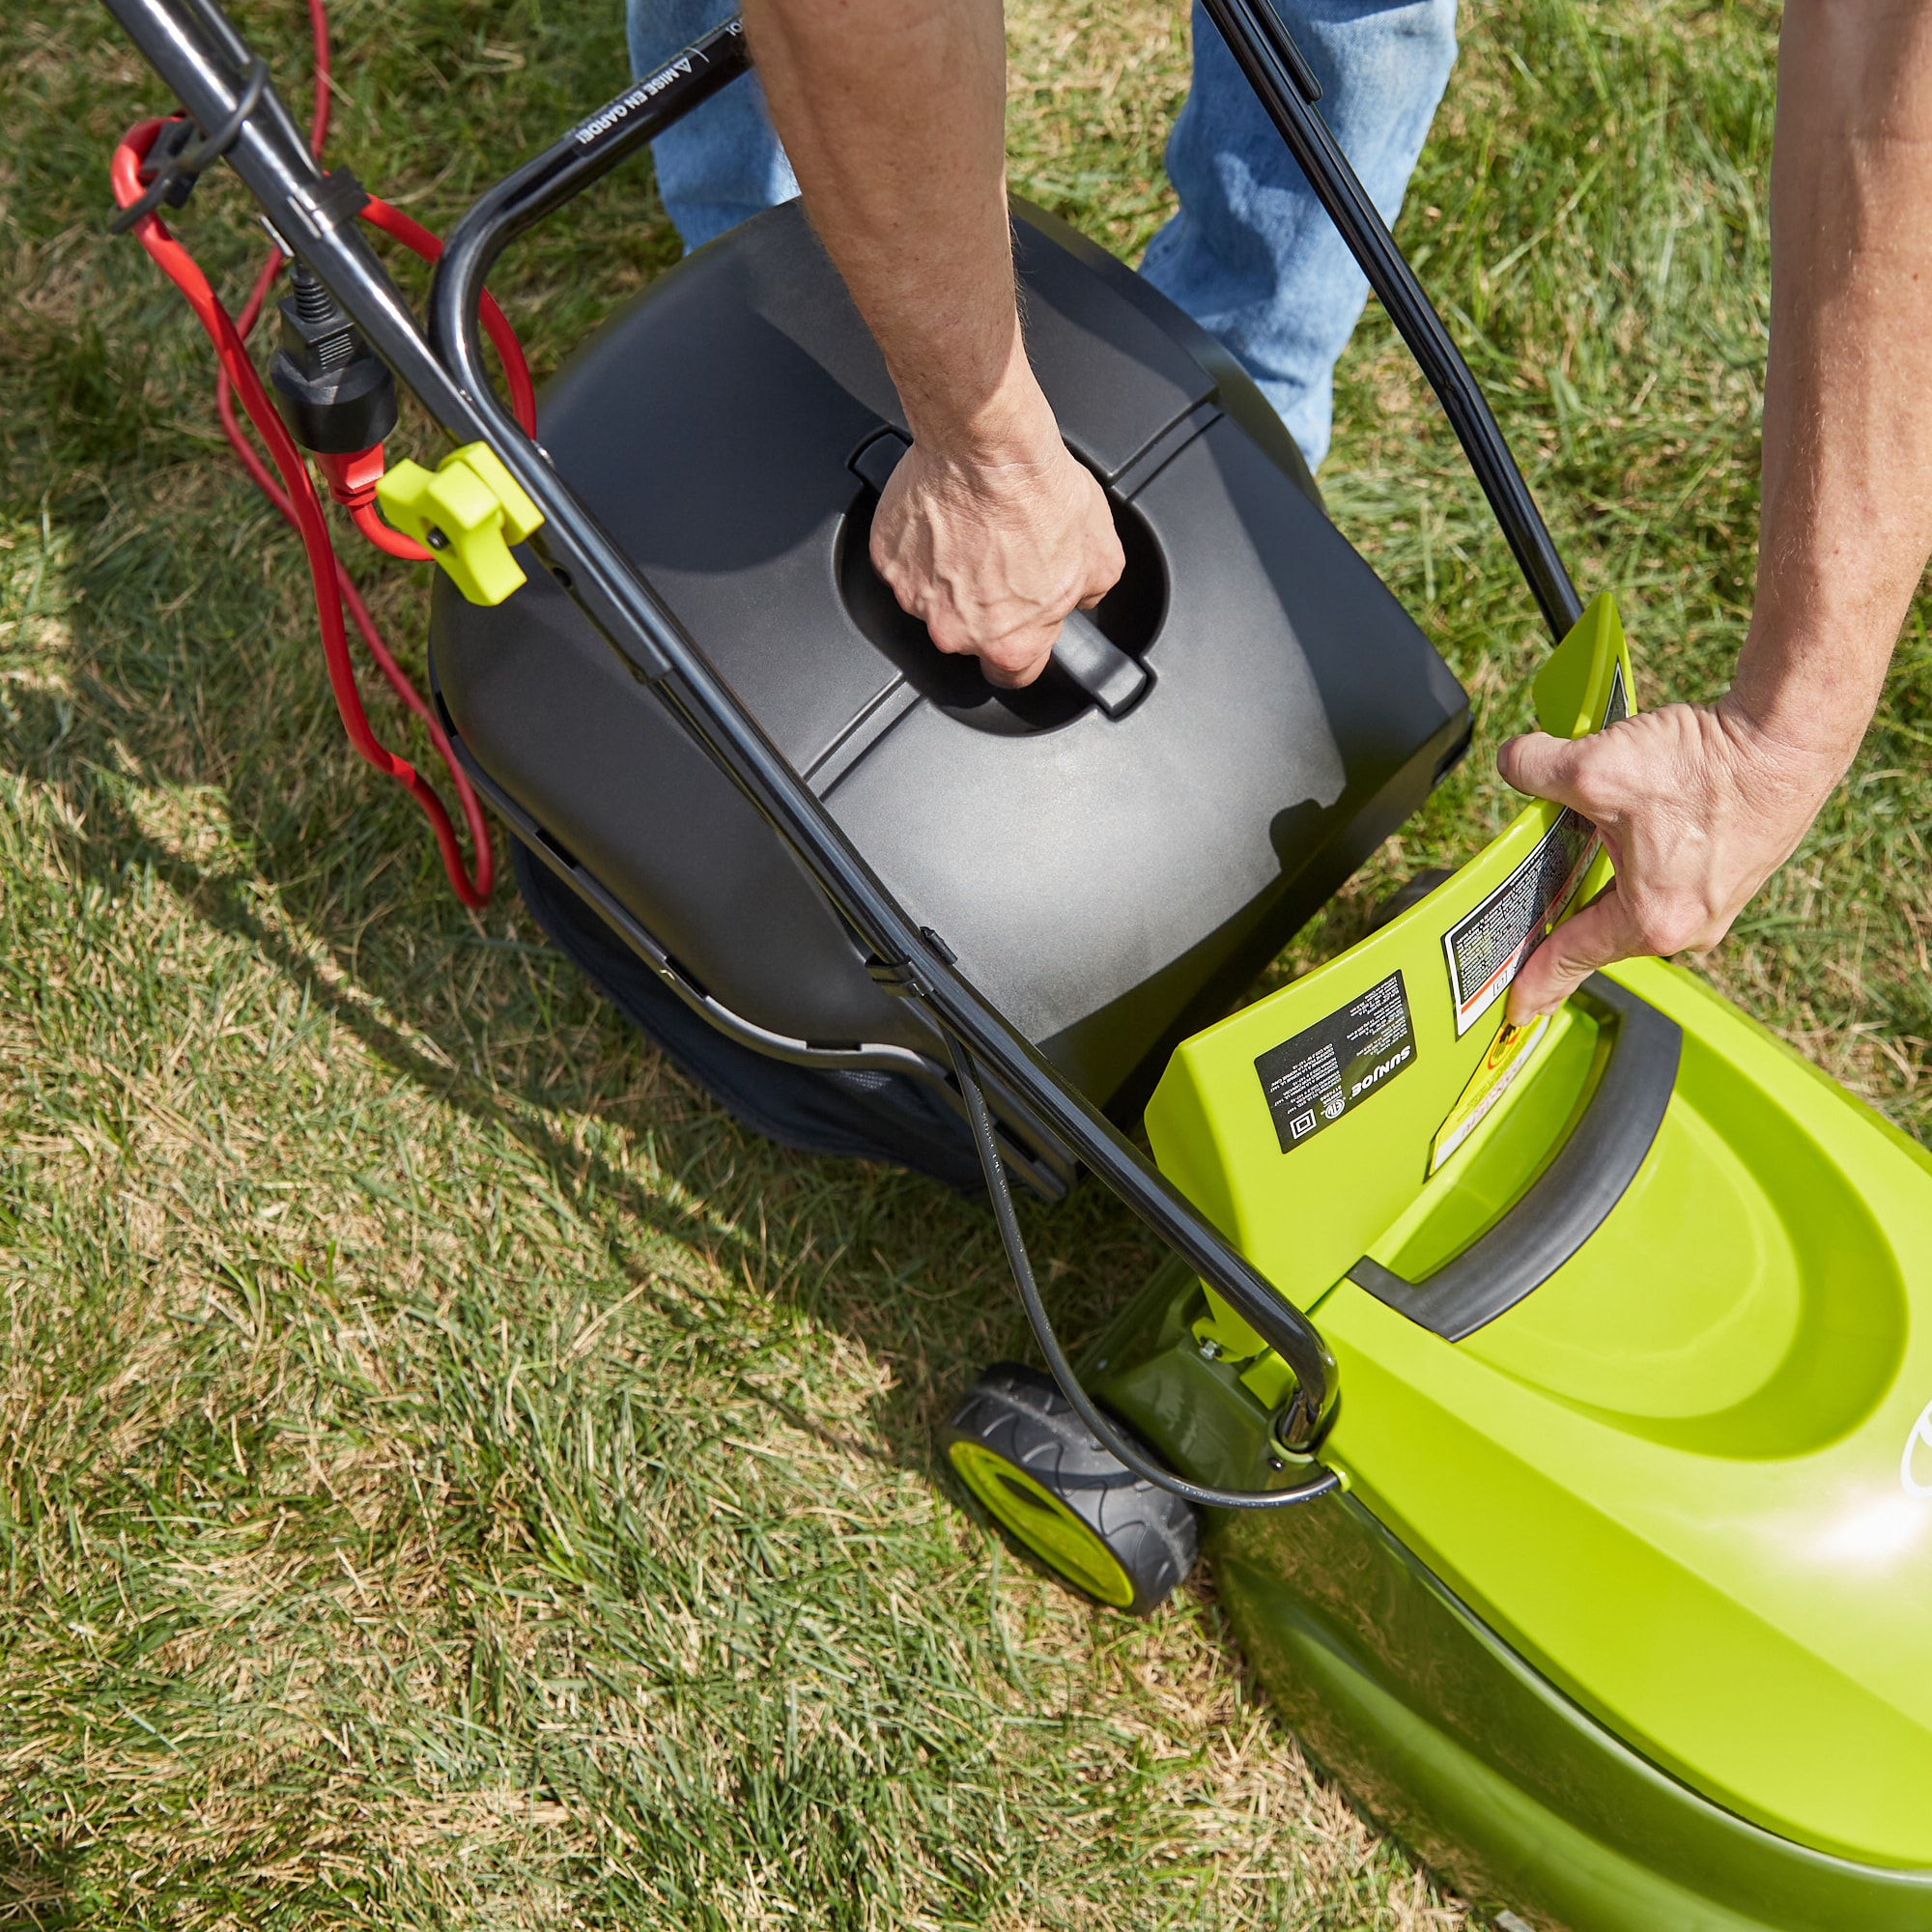 Top Rated Corded Electric Push Lawn Mowers